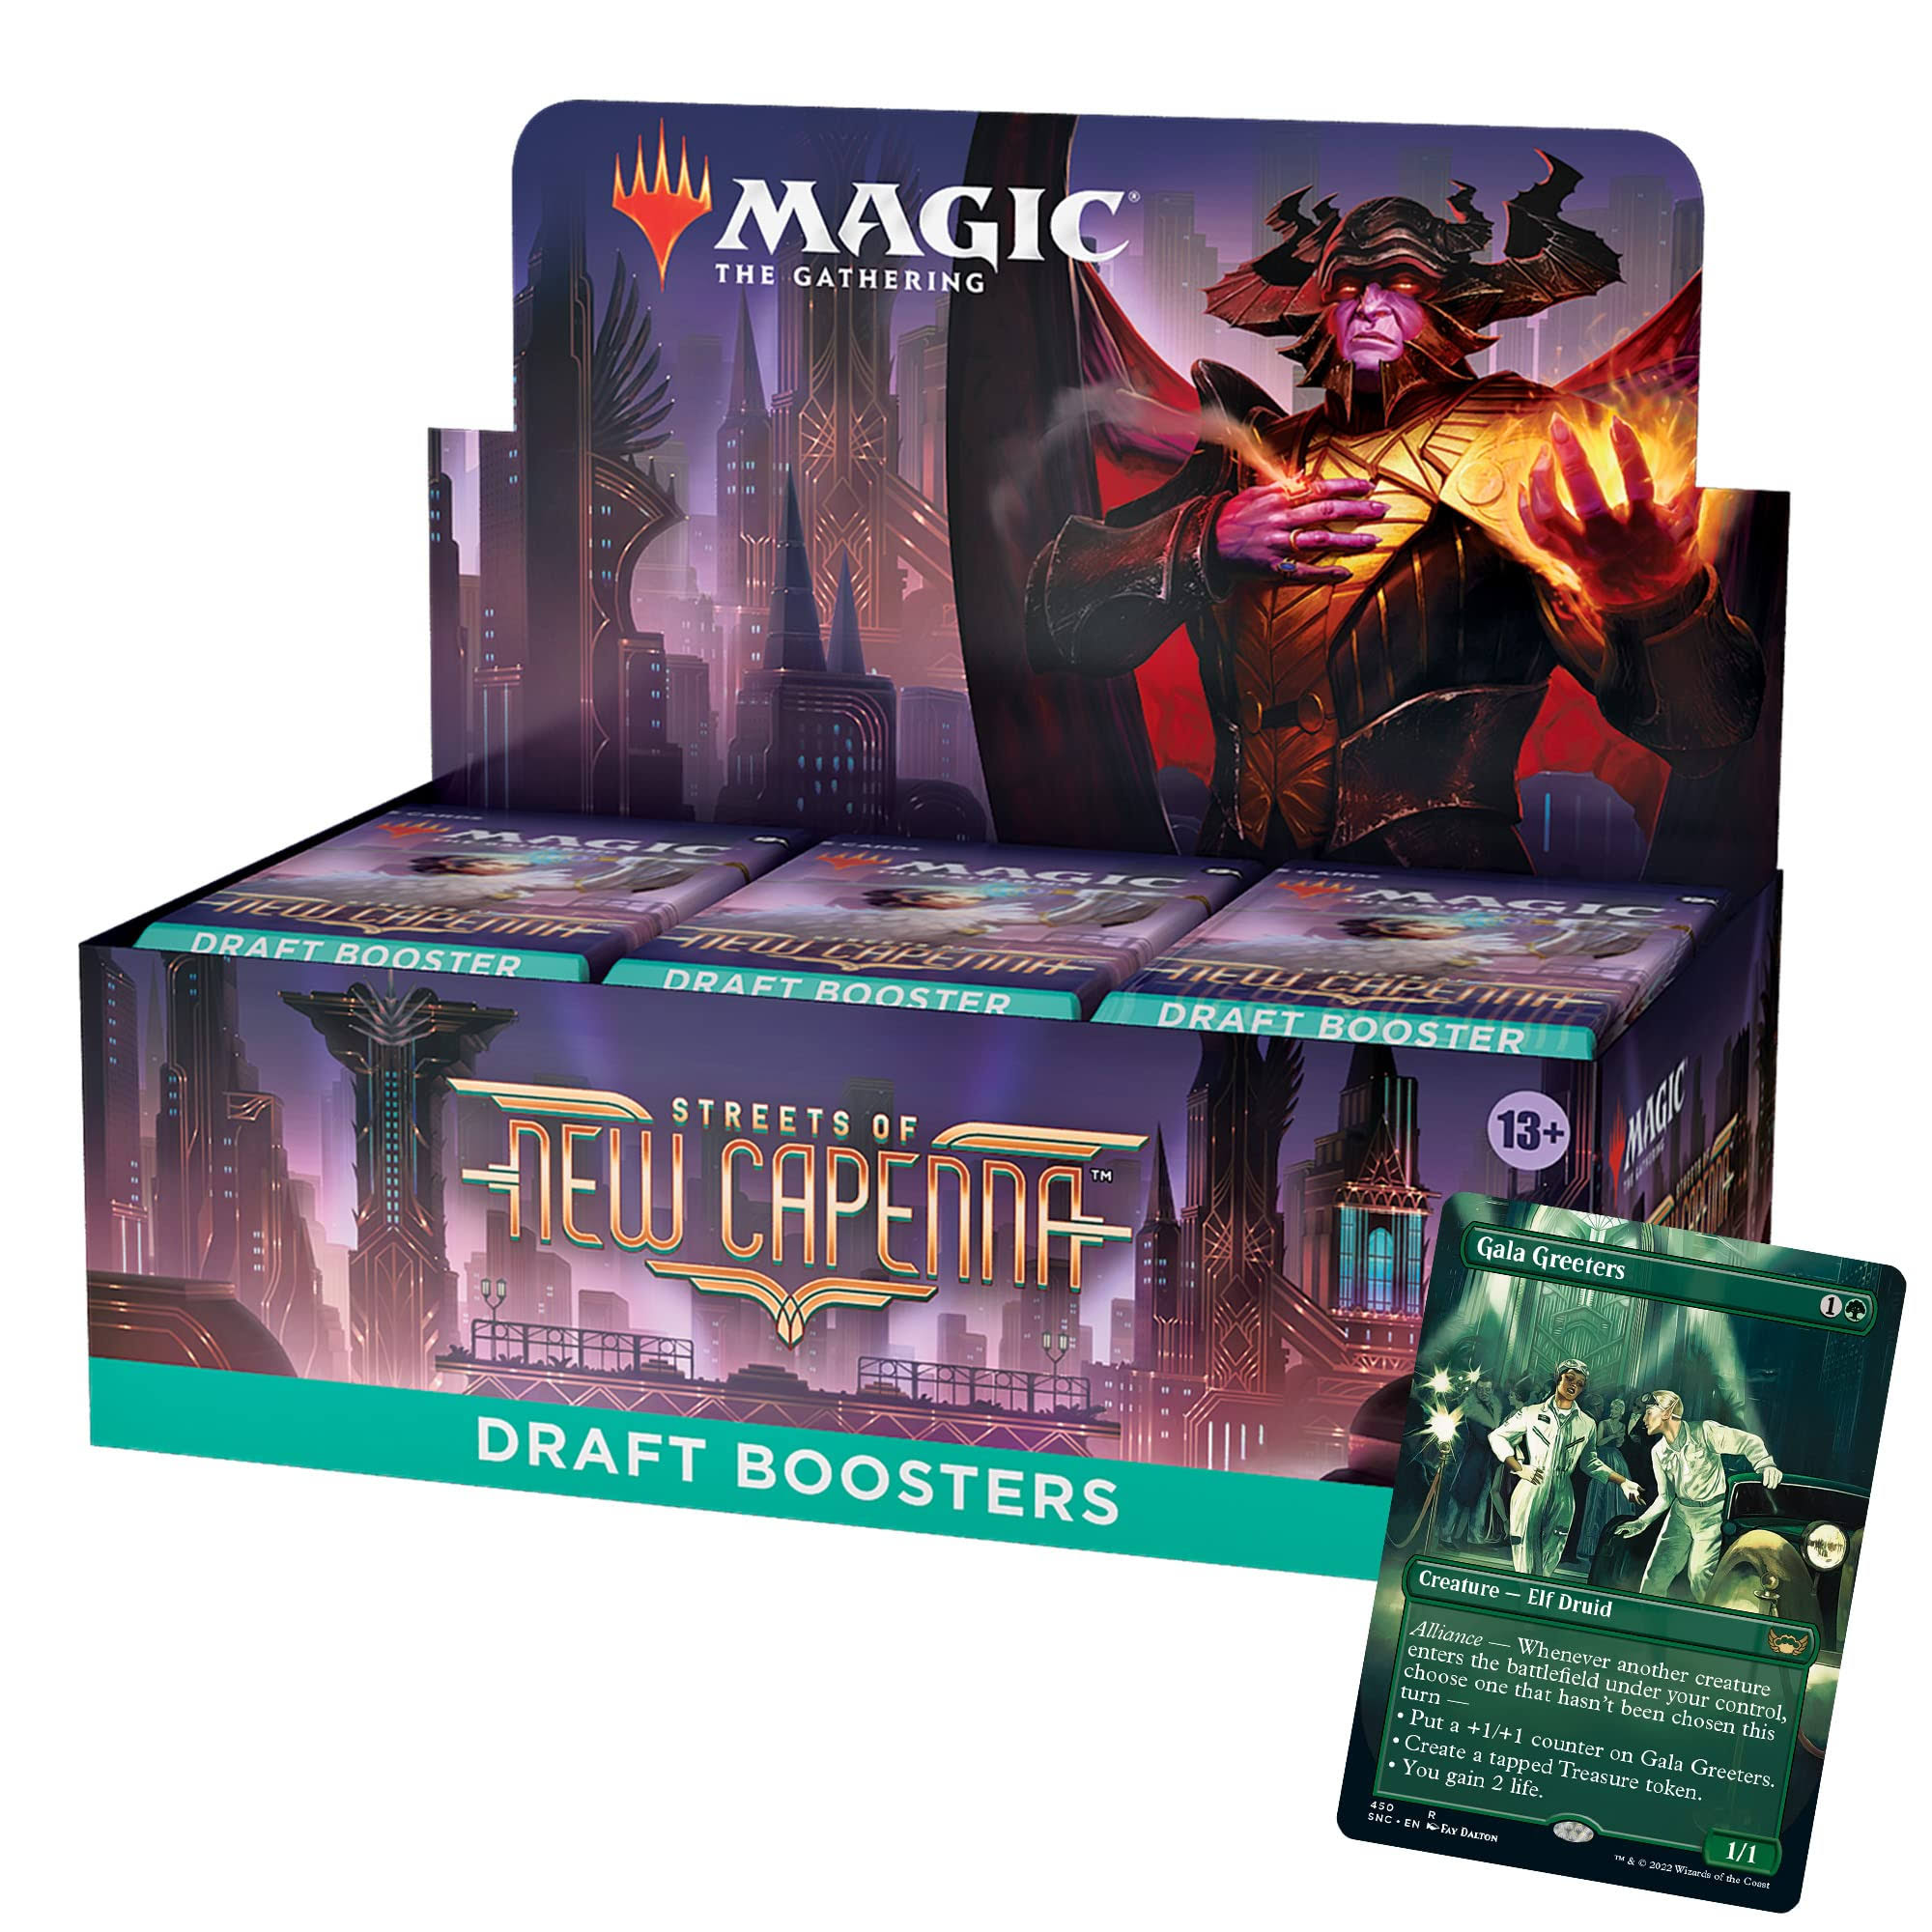 Magic: The Gathering - Streets of New Capenna Draft Booster Box